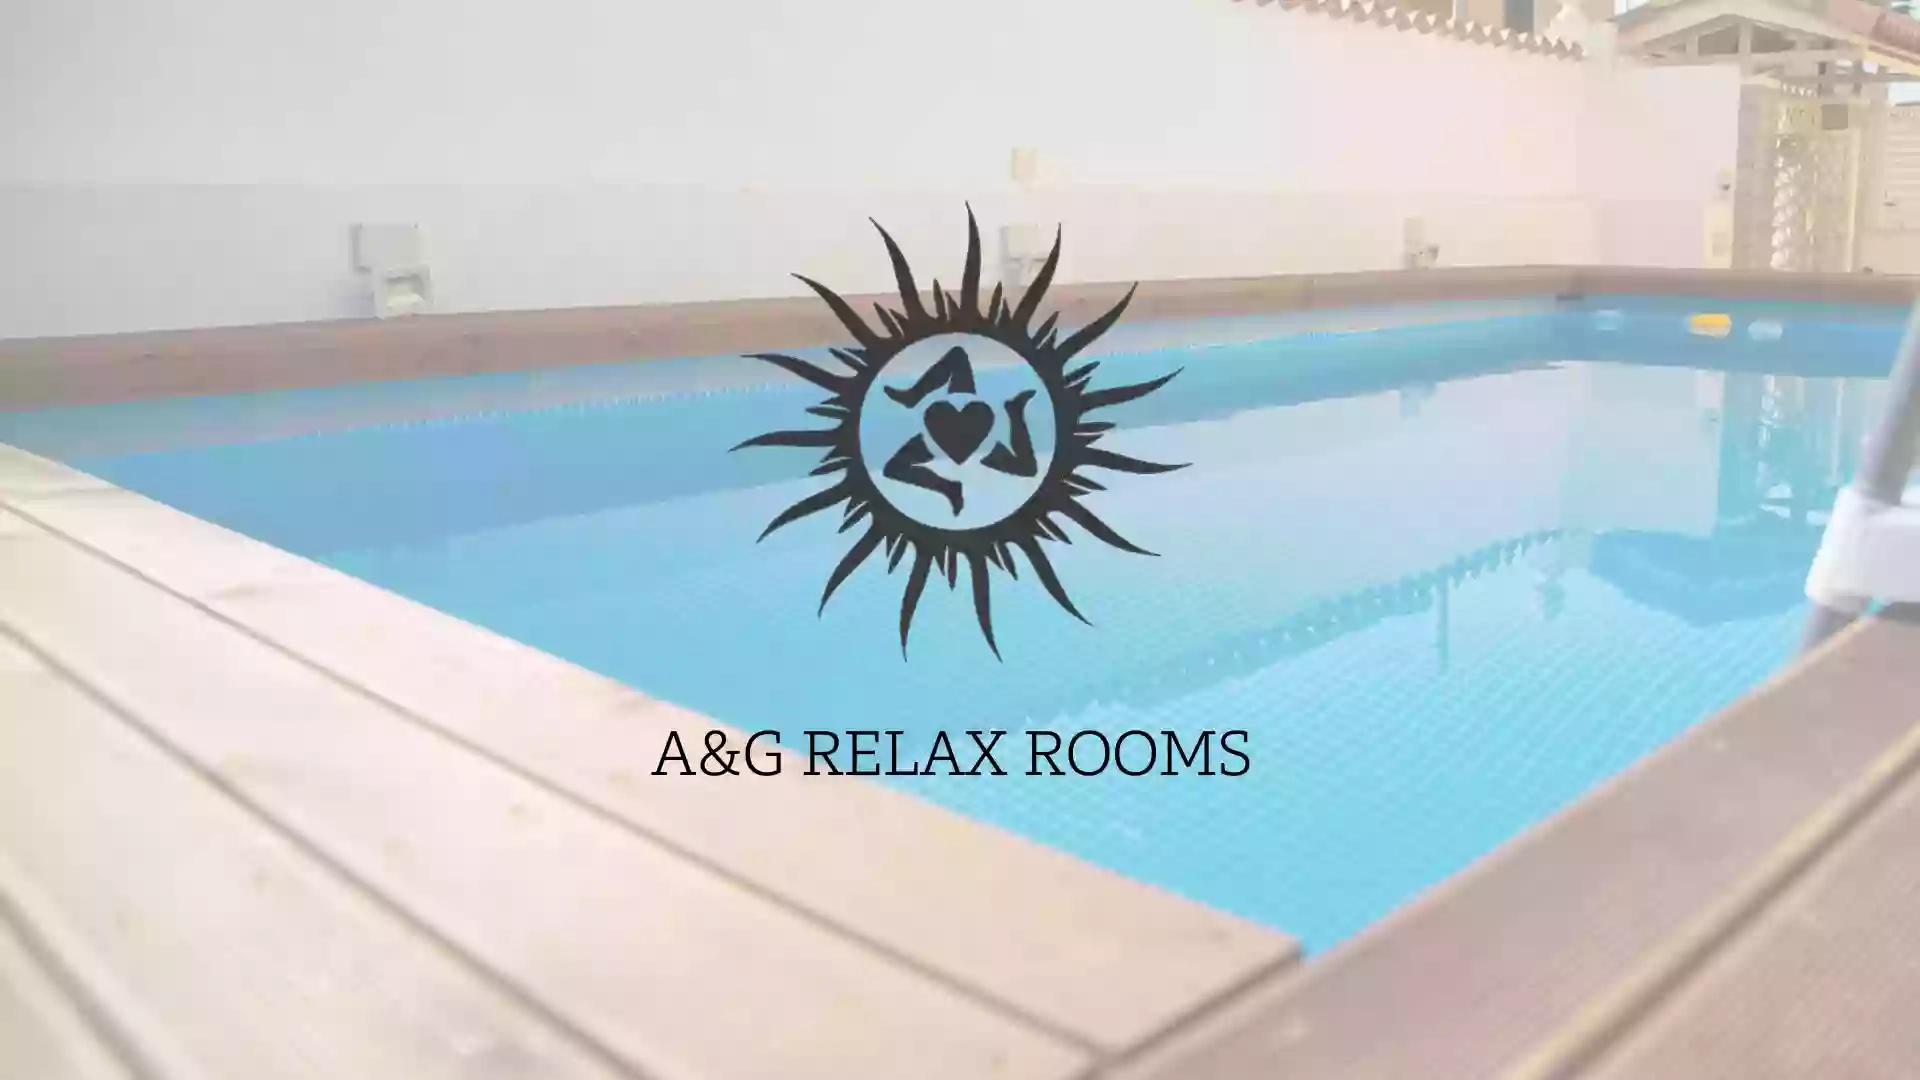 A & G RELAX ROOMS